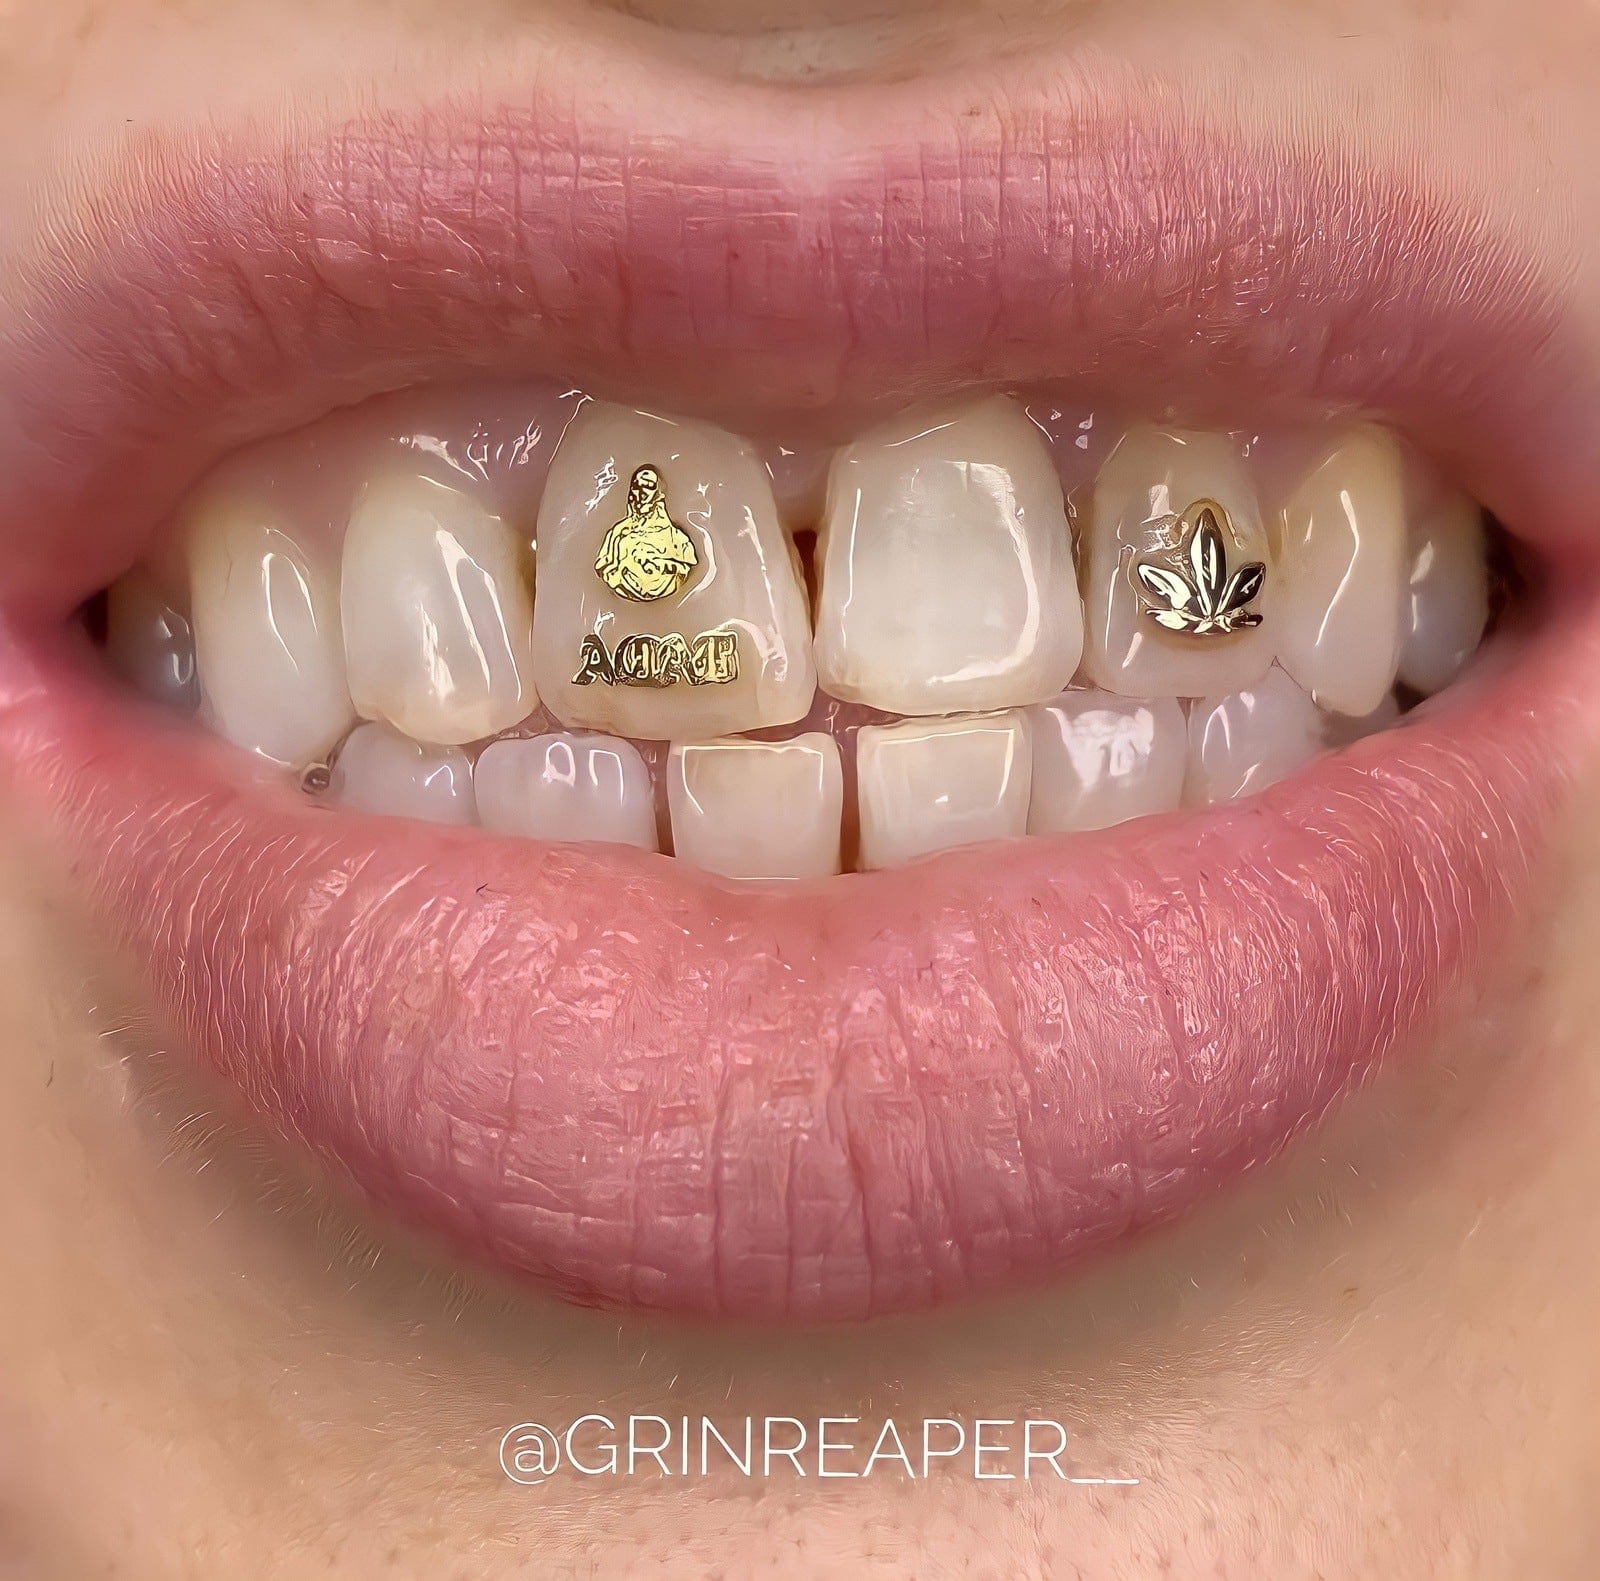 Jesus-Christ tooth gems © ISISNGOLD